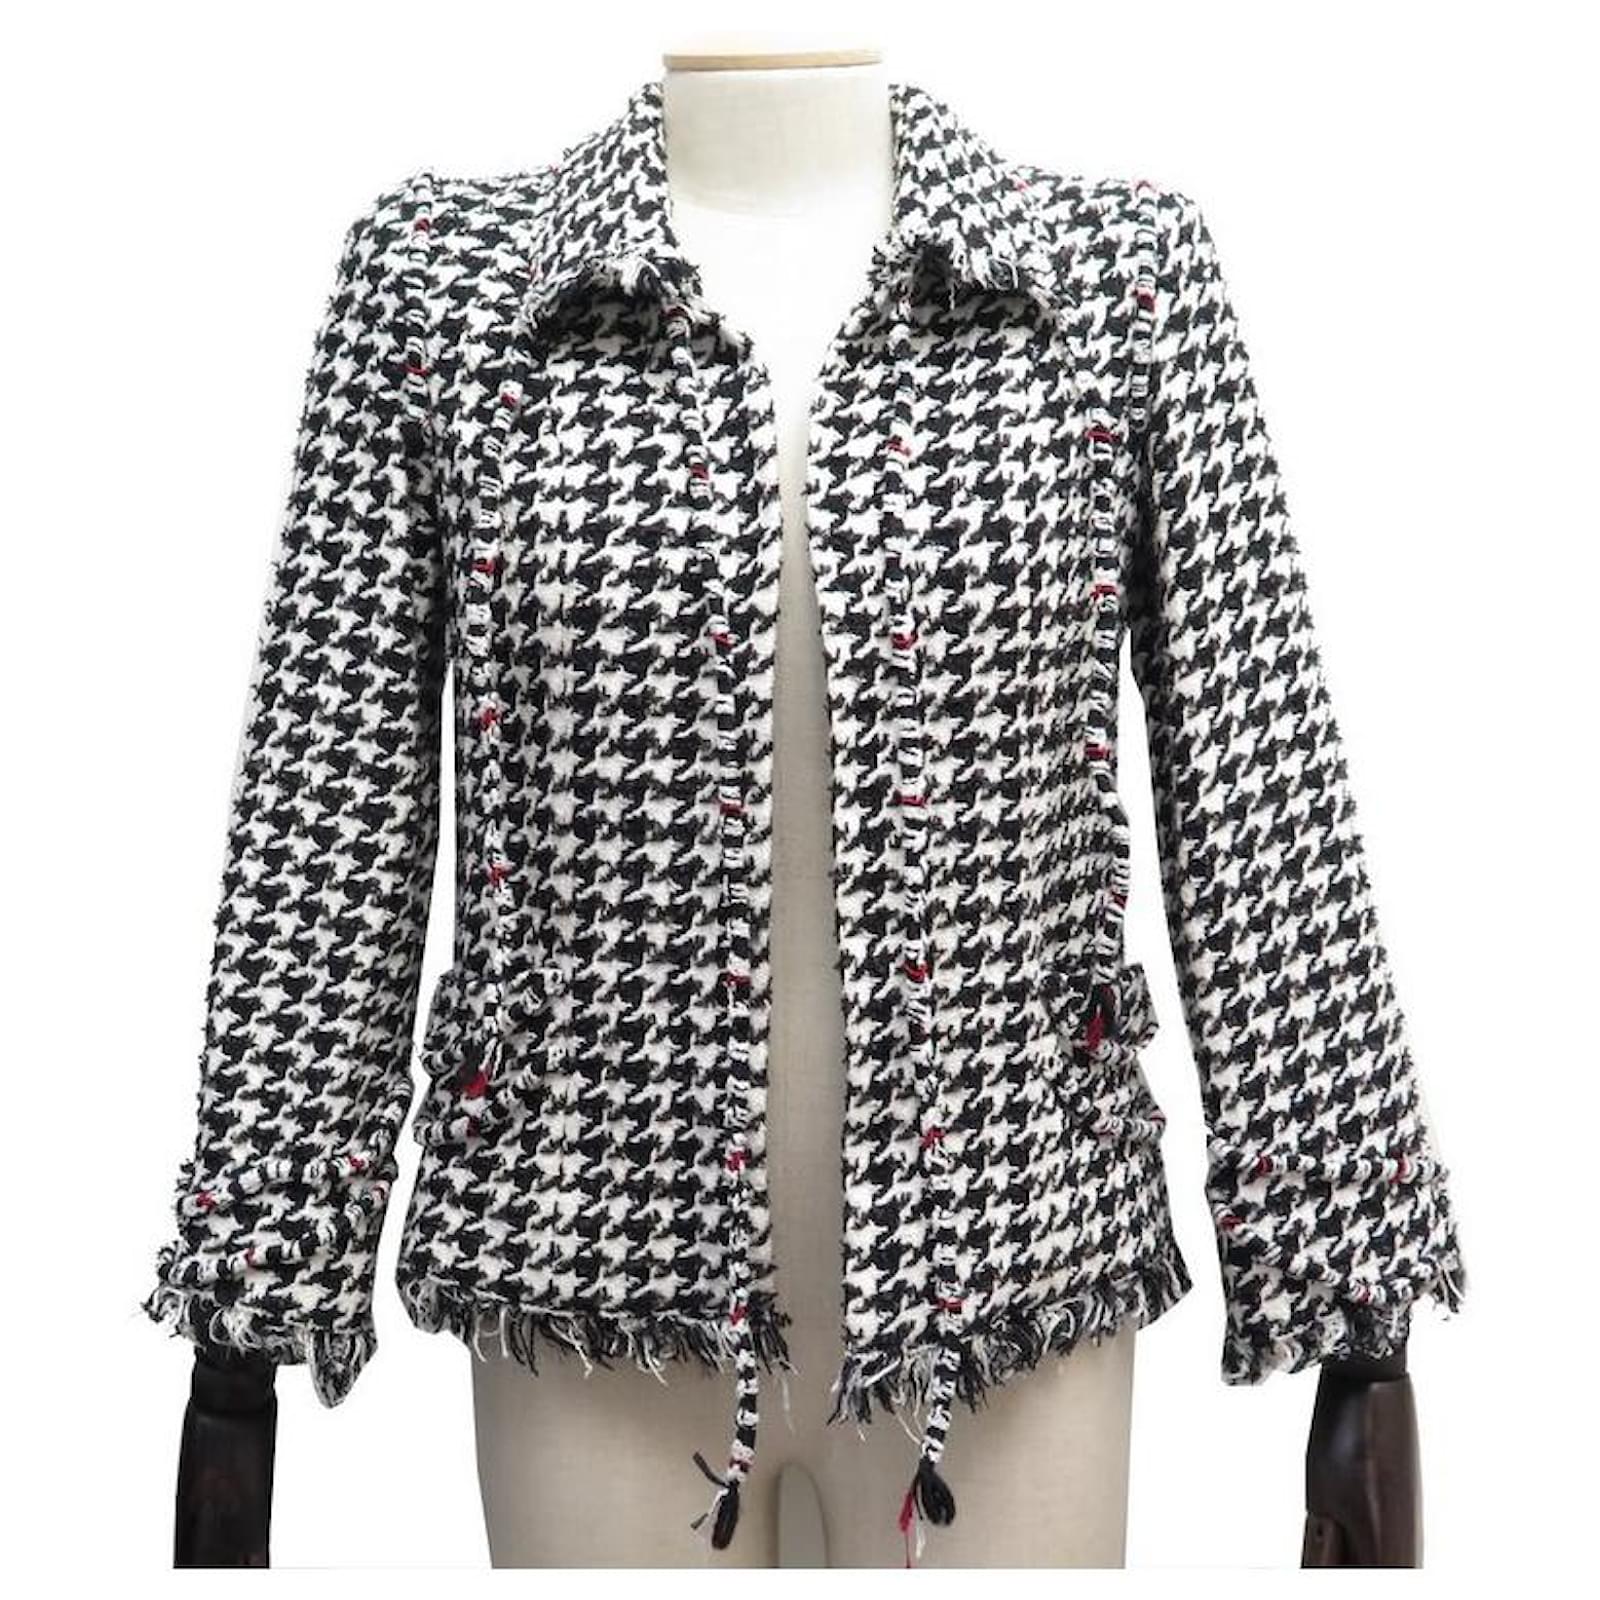 CHANEL P JACKET37636 M 38 BLACK AND WHITE HOUNDSTOOTH COTTON TWEED JACKET